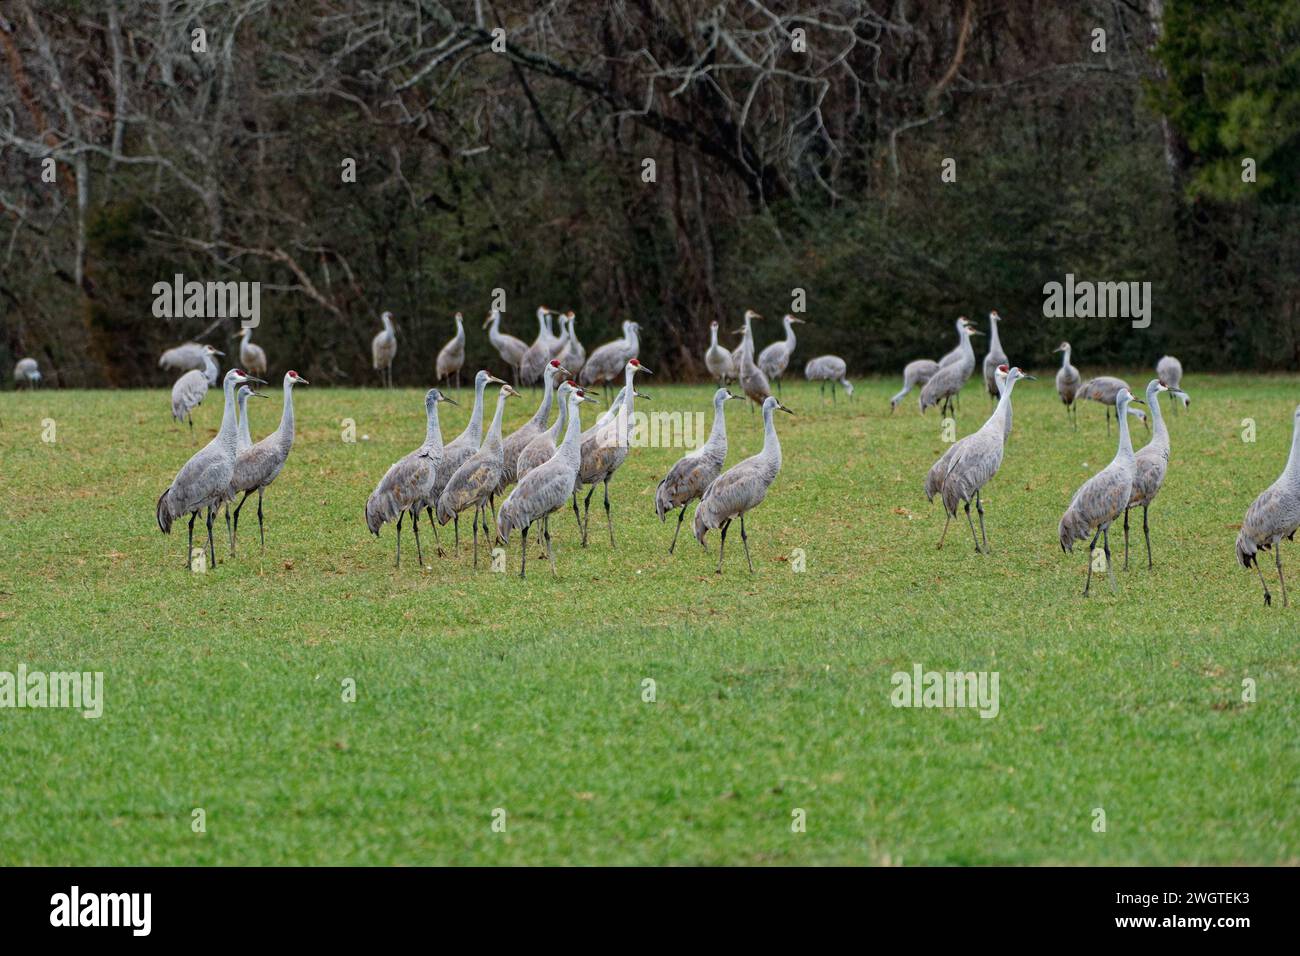 The group of sandhill cranes in the foreground are gathering together to prepare for flying with another group in the background are foraging for food Stock Photo